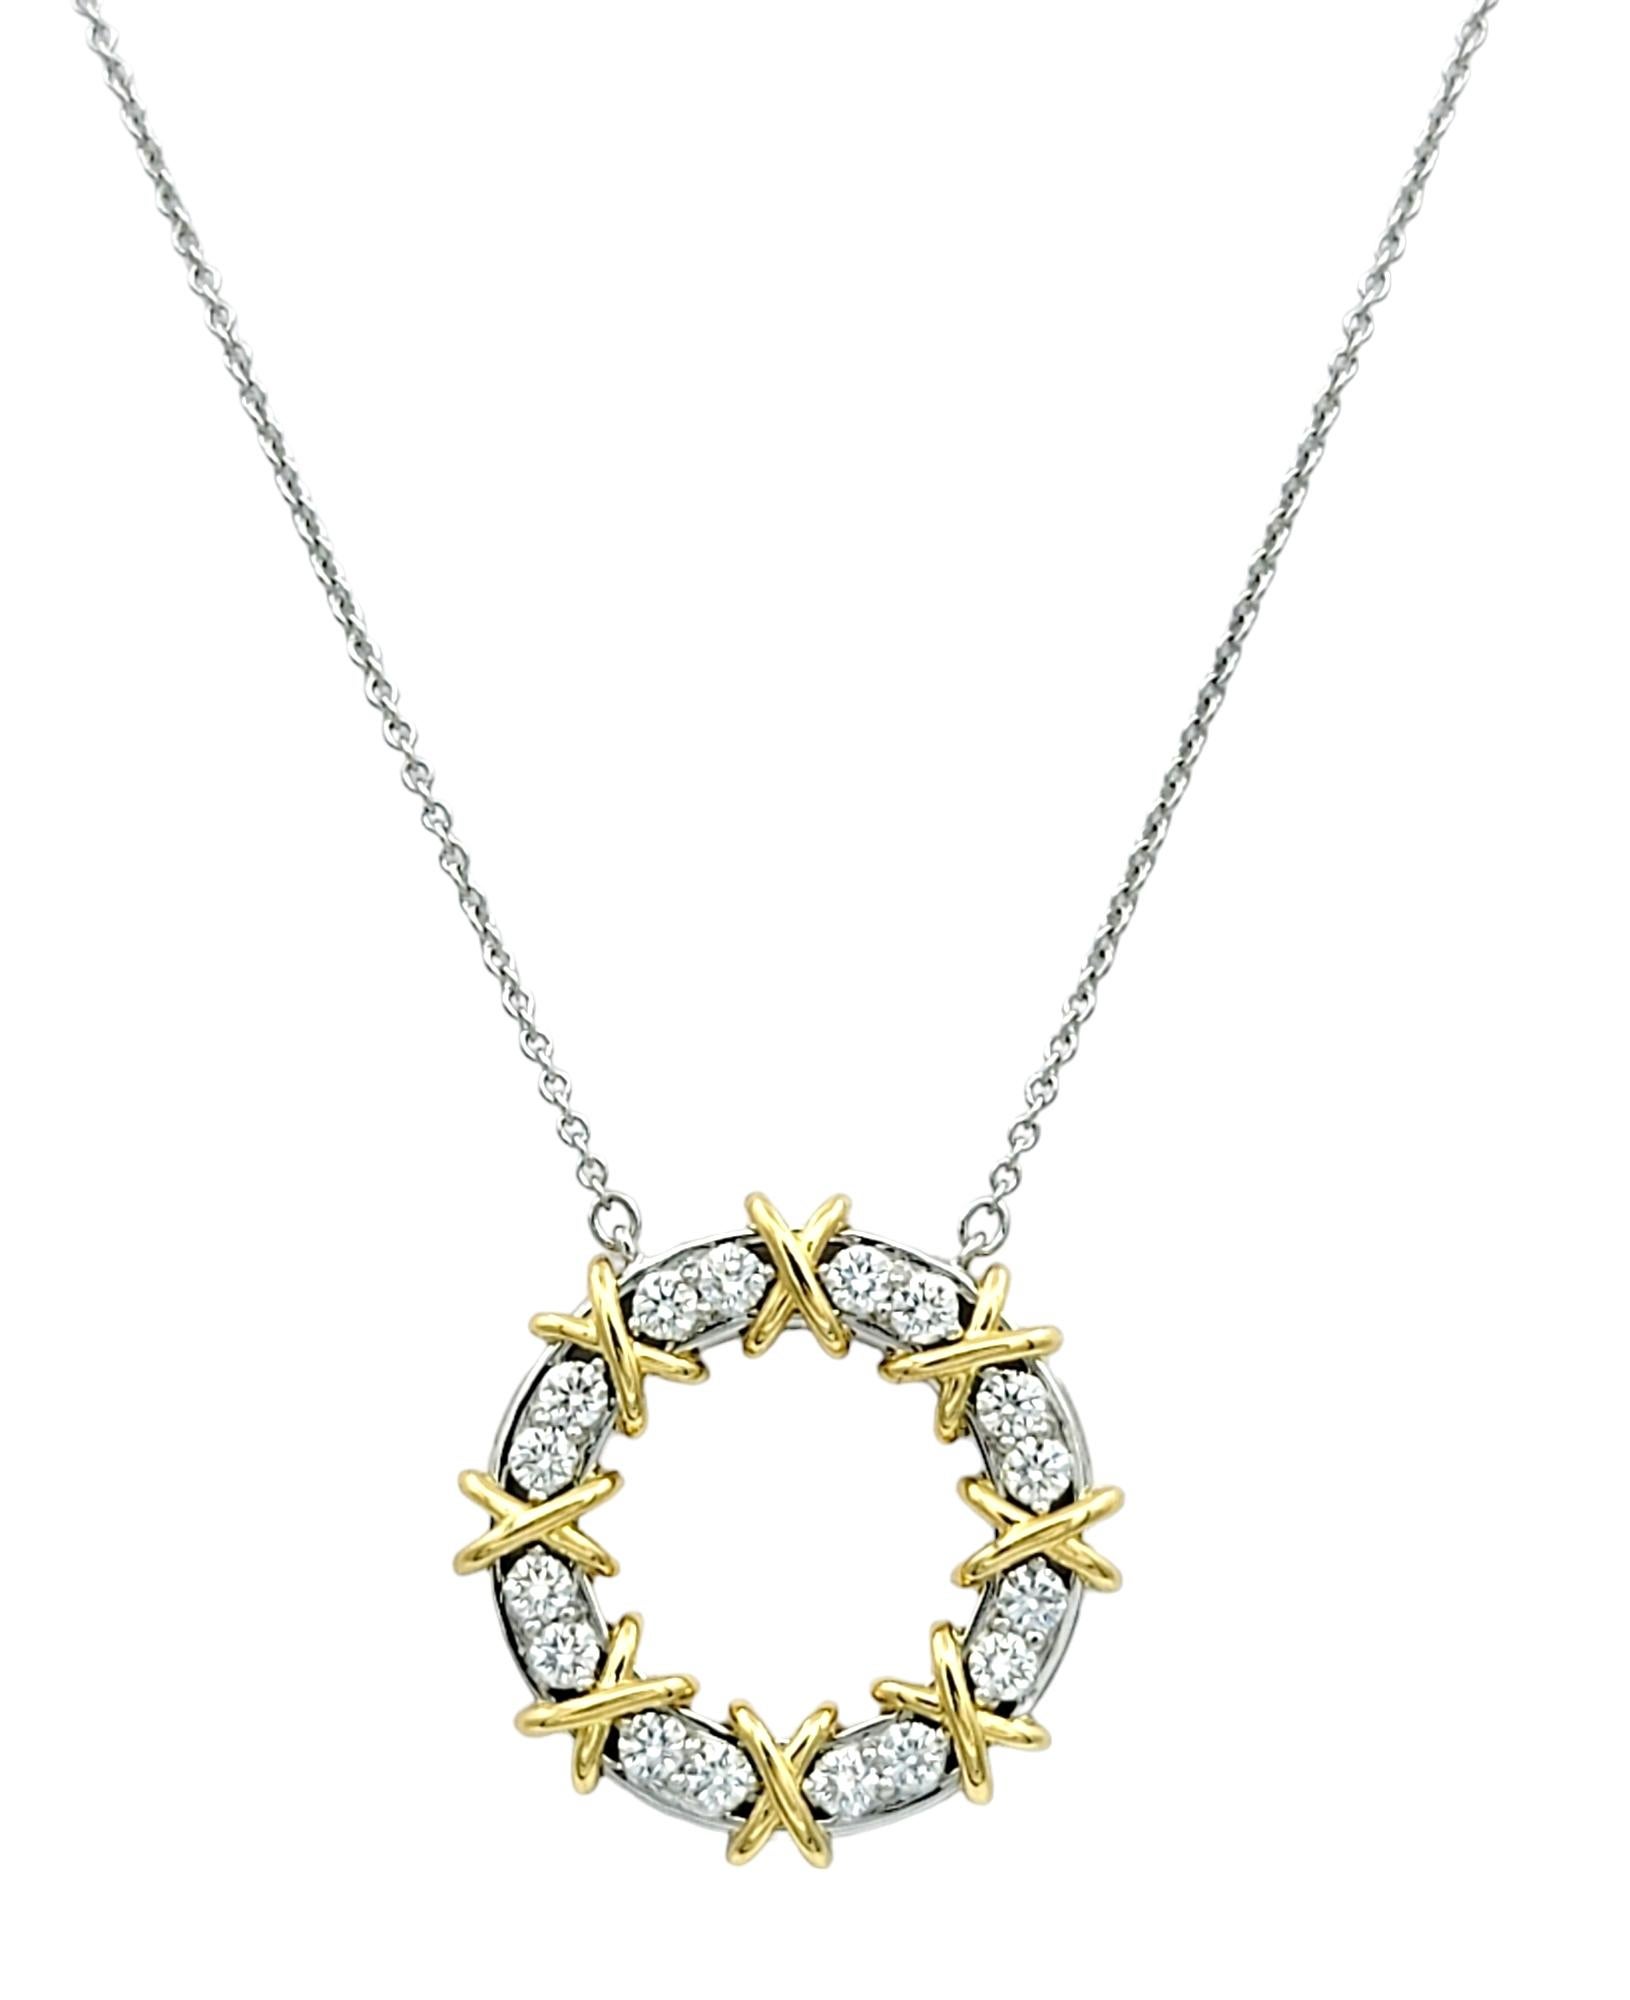 Adorn yourself with the timeless sophistication of this iconic Tiffany & Co. 'Sixteen Stone 'Schlumberger necklace, a stunning fusion of classic design and luxurious materials. The pendant, a captivating open circle, is a masterpiece of